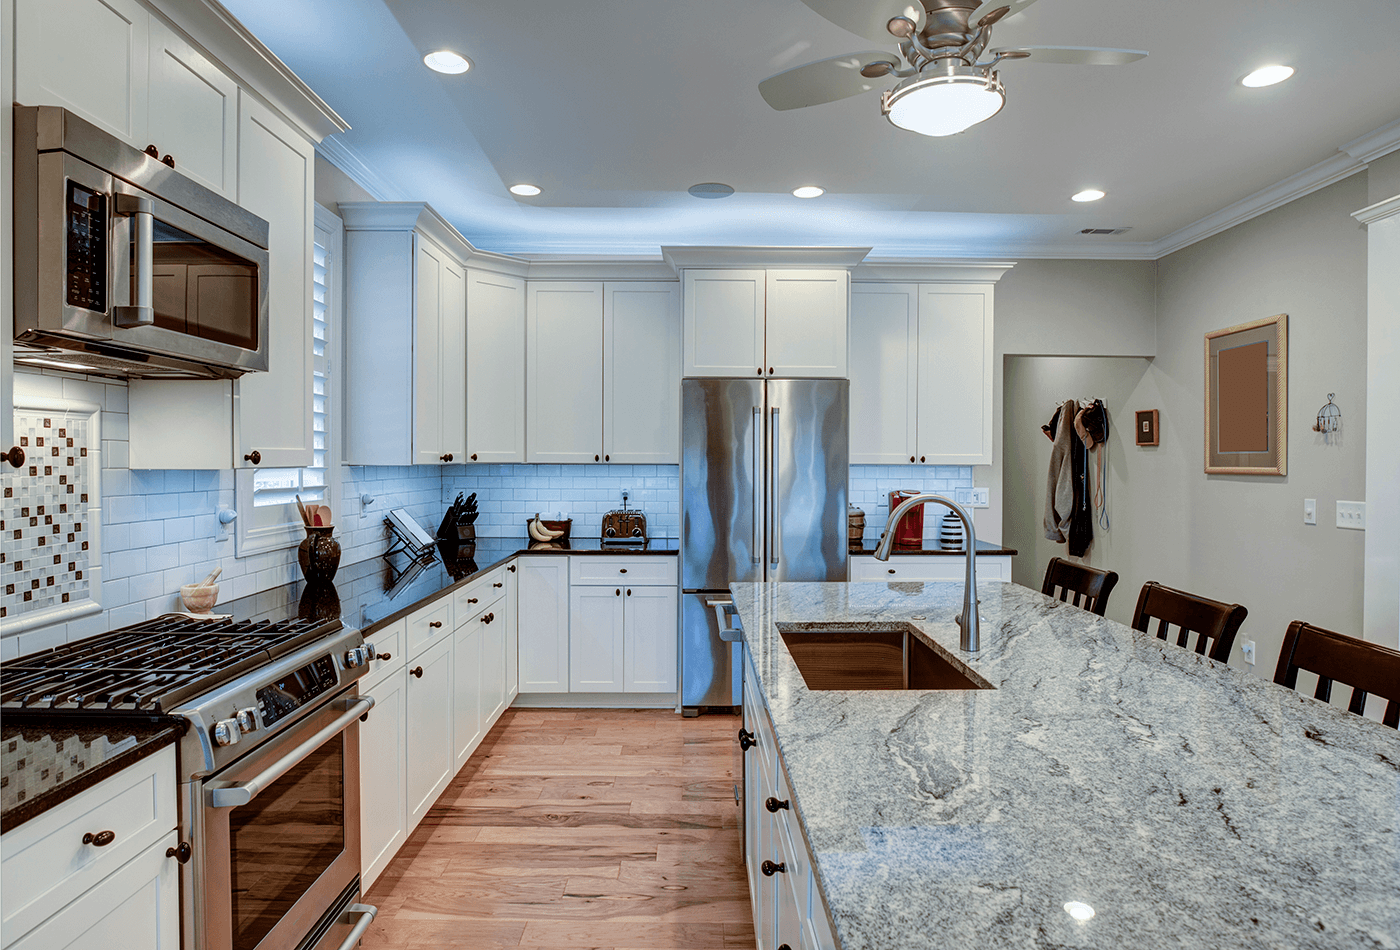 Porcelain vs Granite: Which One is Your Choice? Come Choose